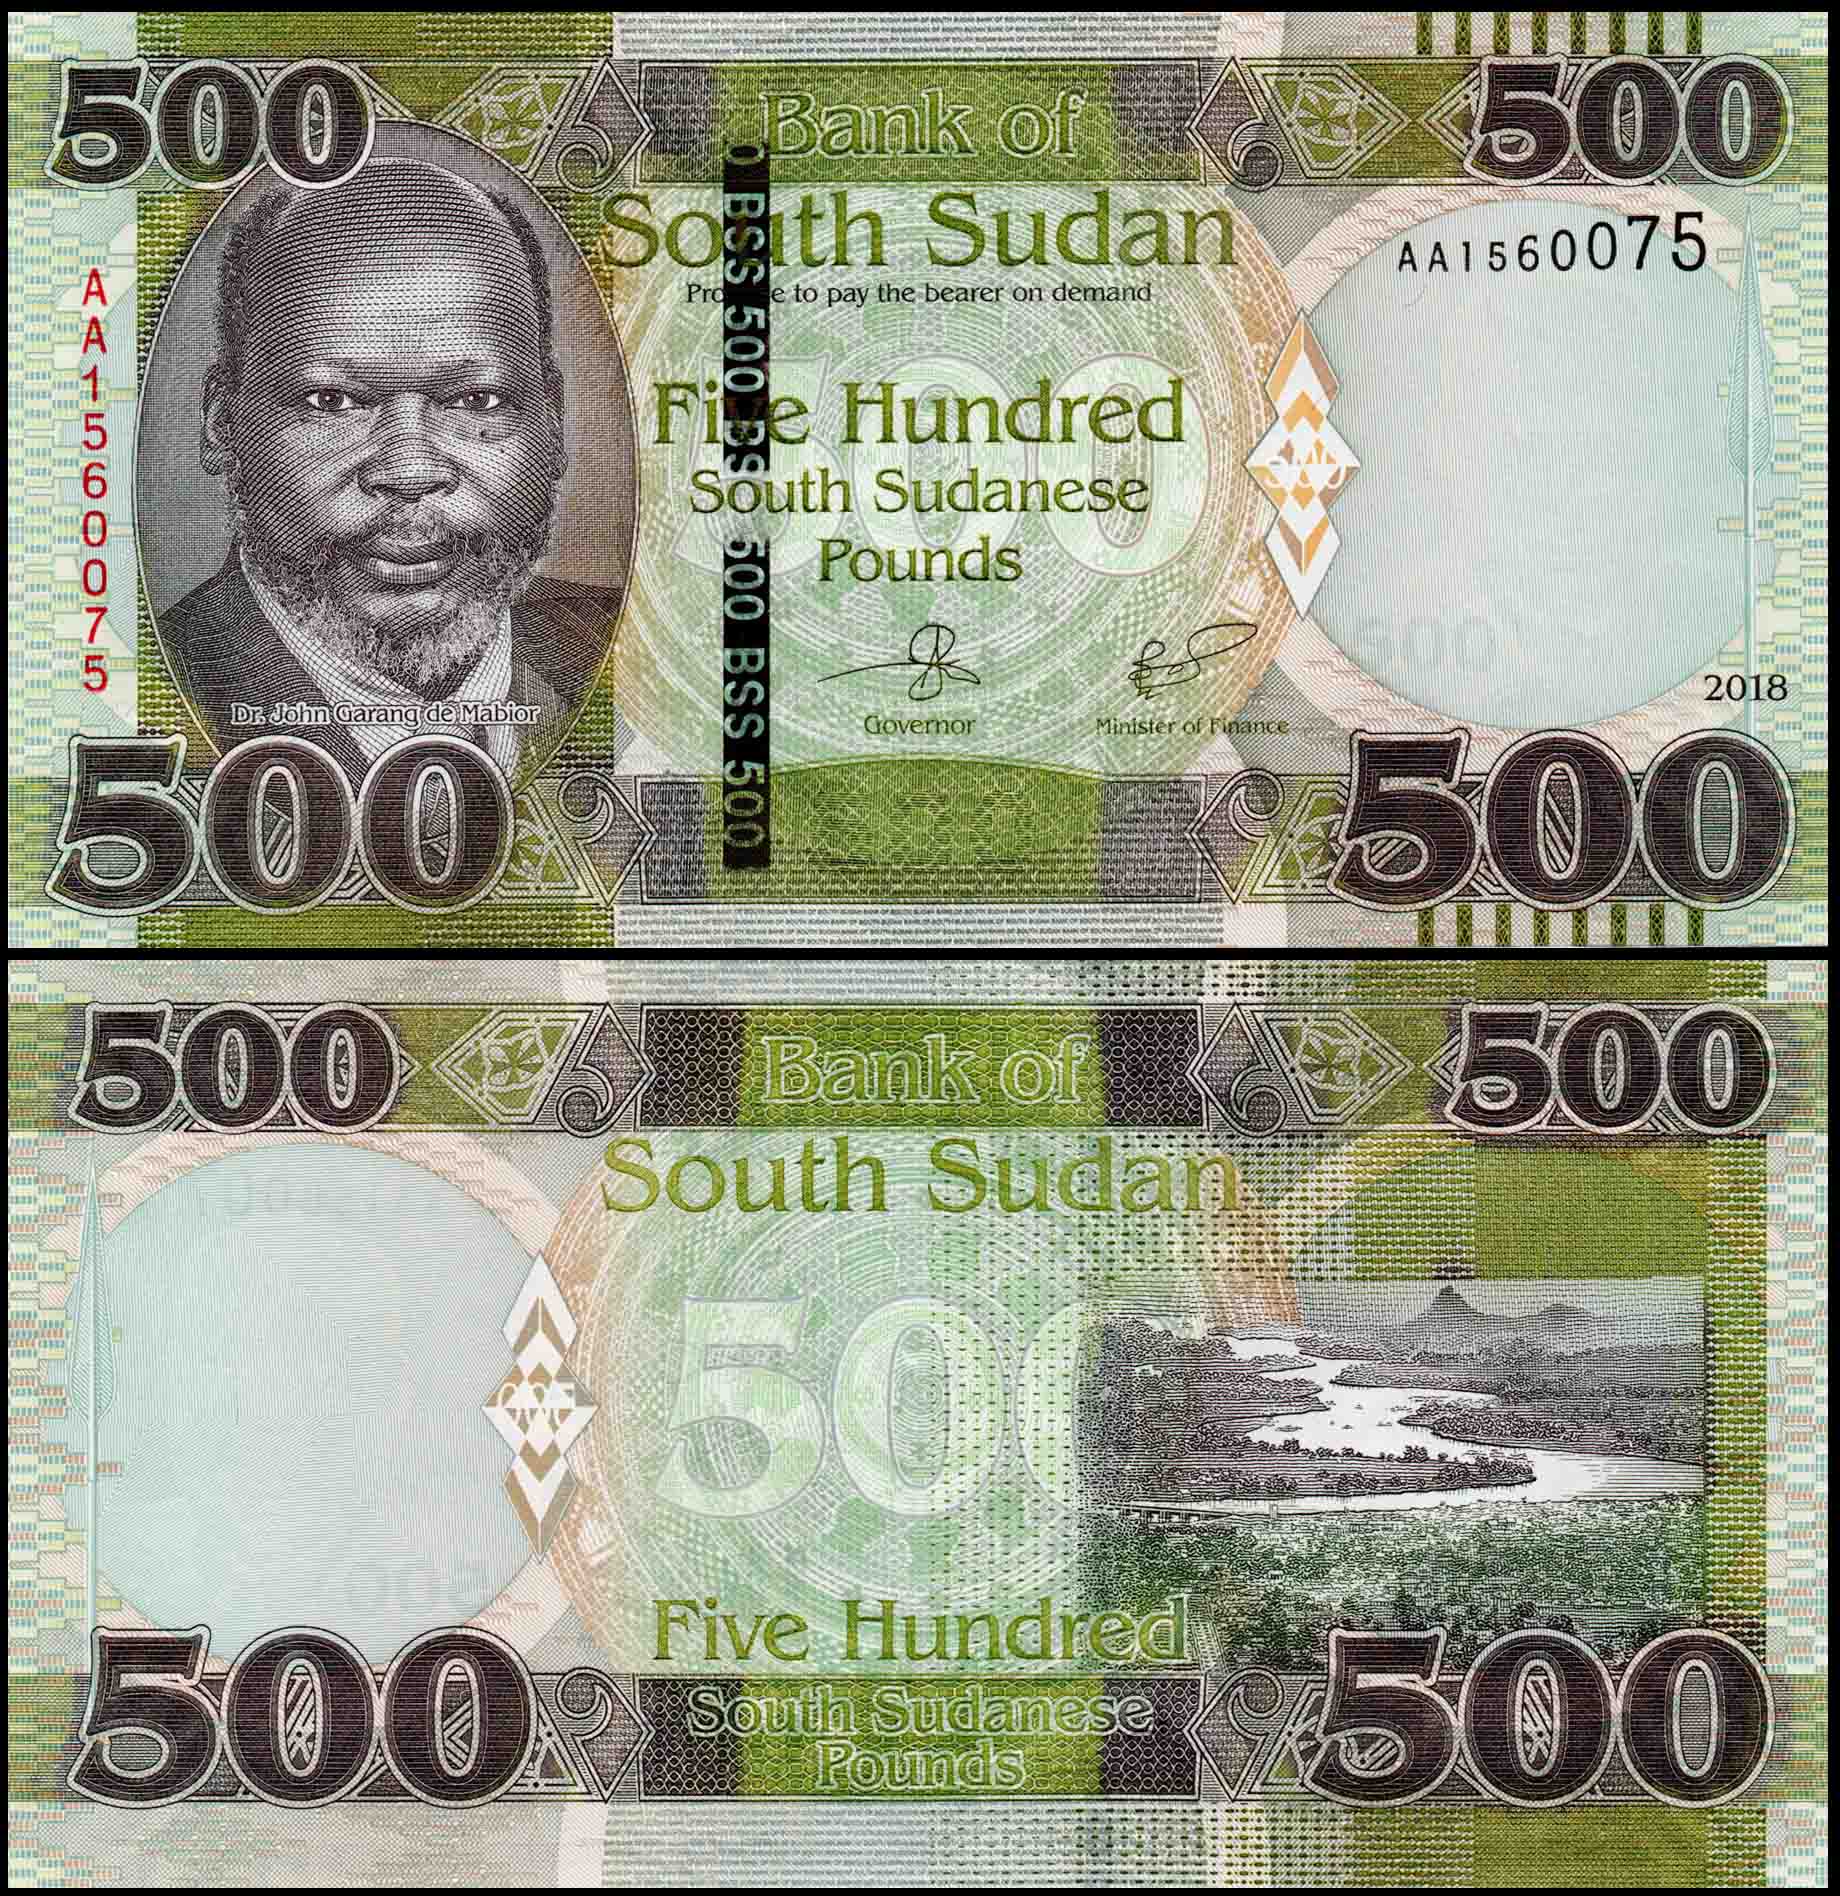 South Sudan’s currency rated 3rd worst-performer in Africa